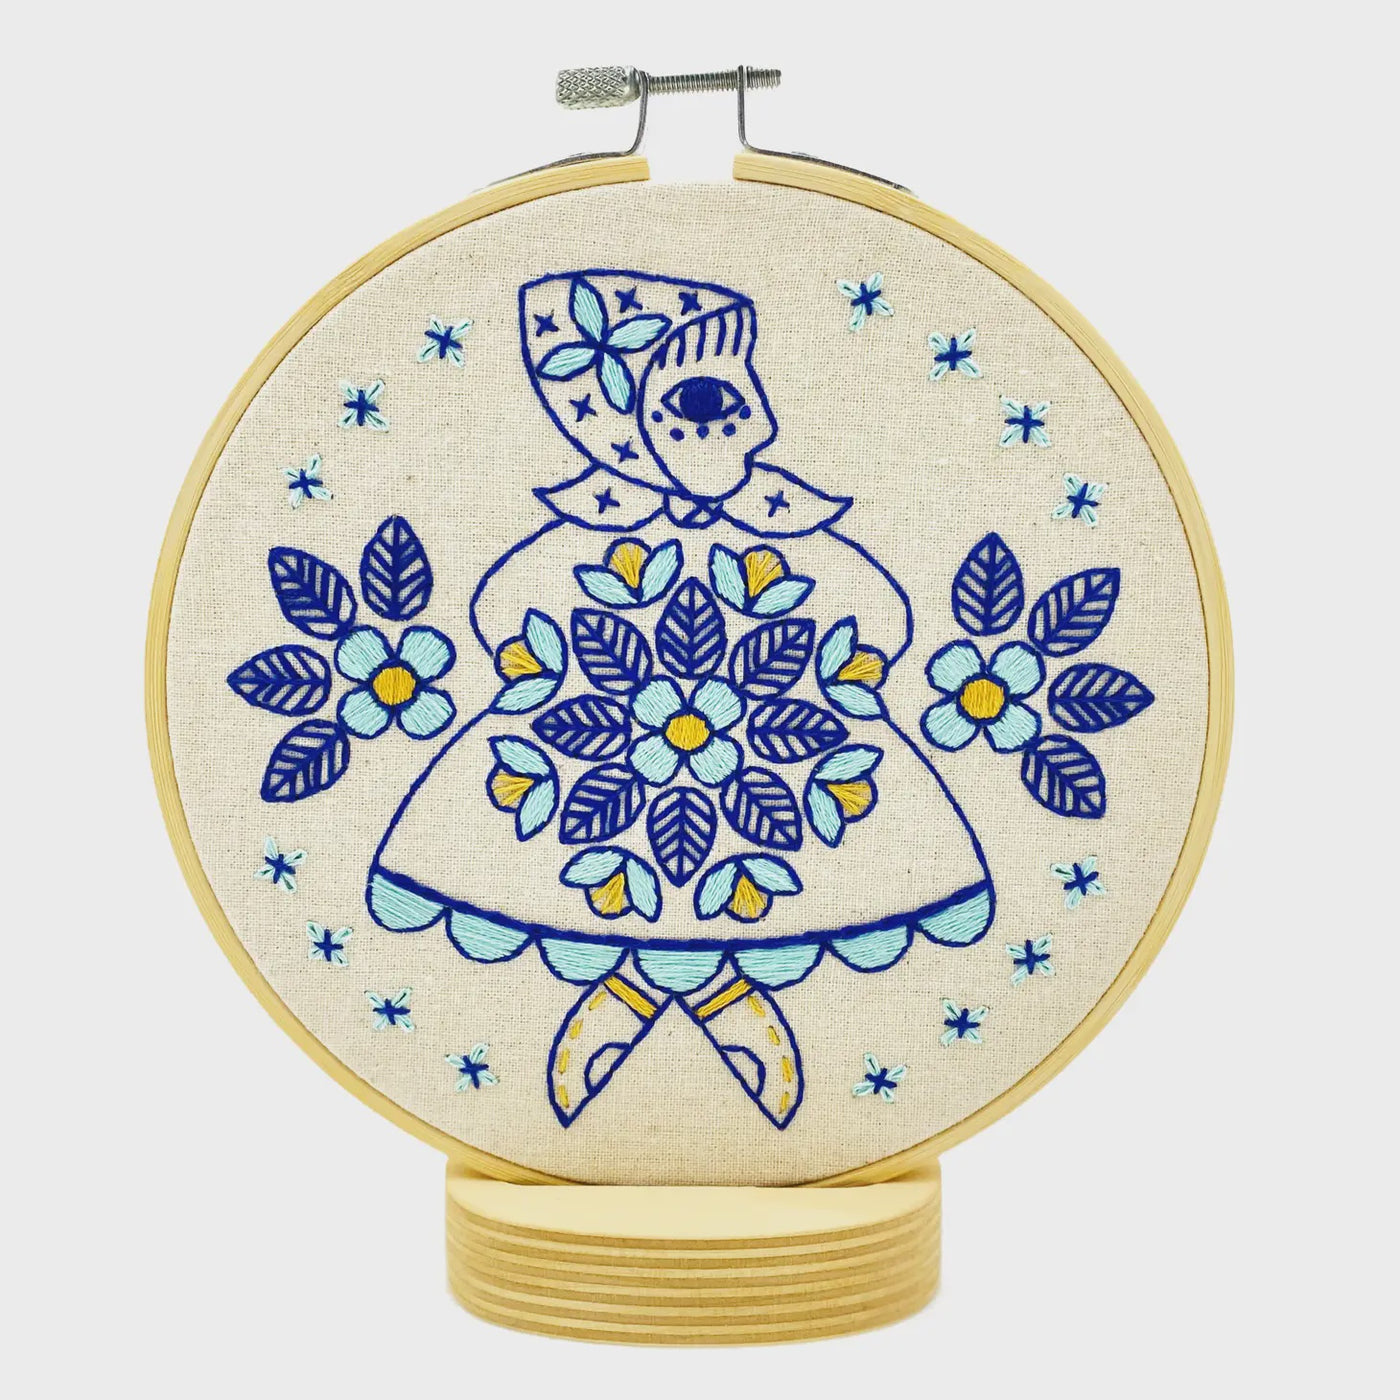 Lady Dancing Embroidery Kit